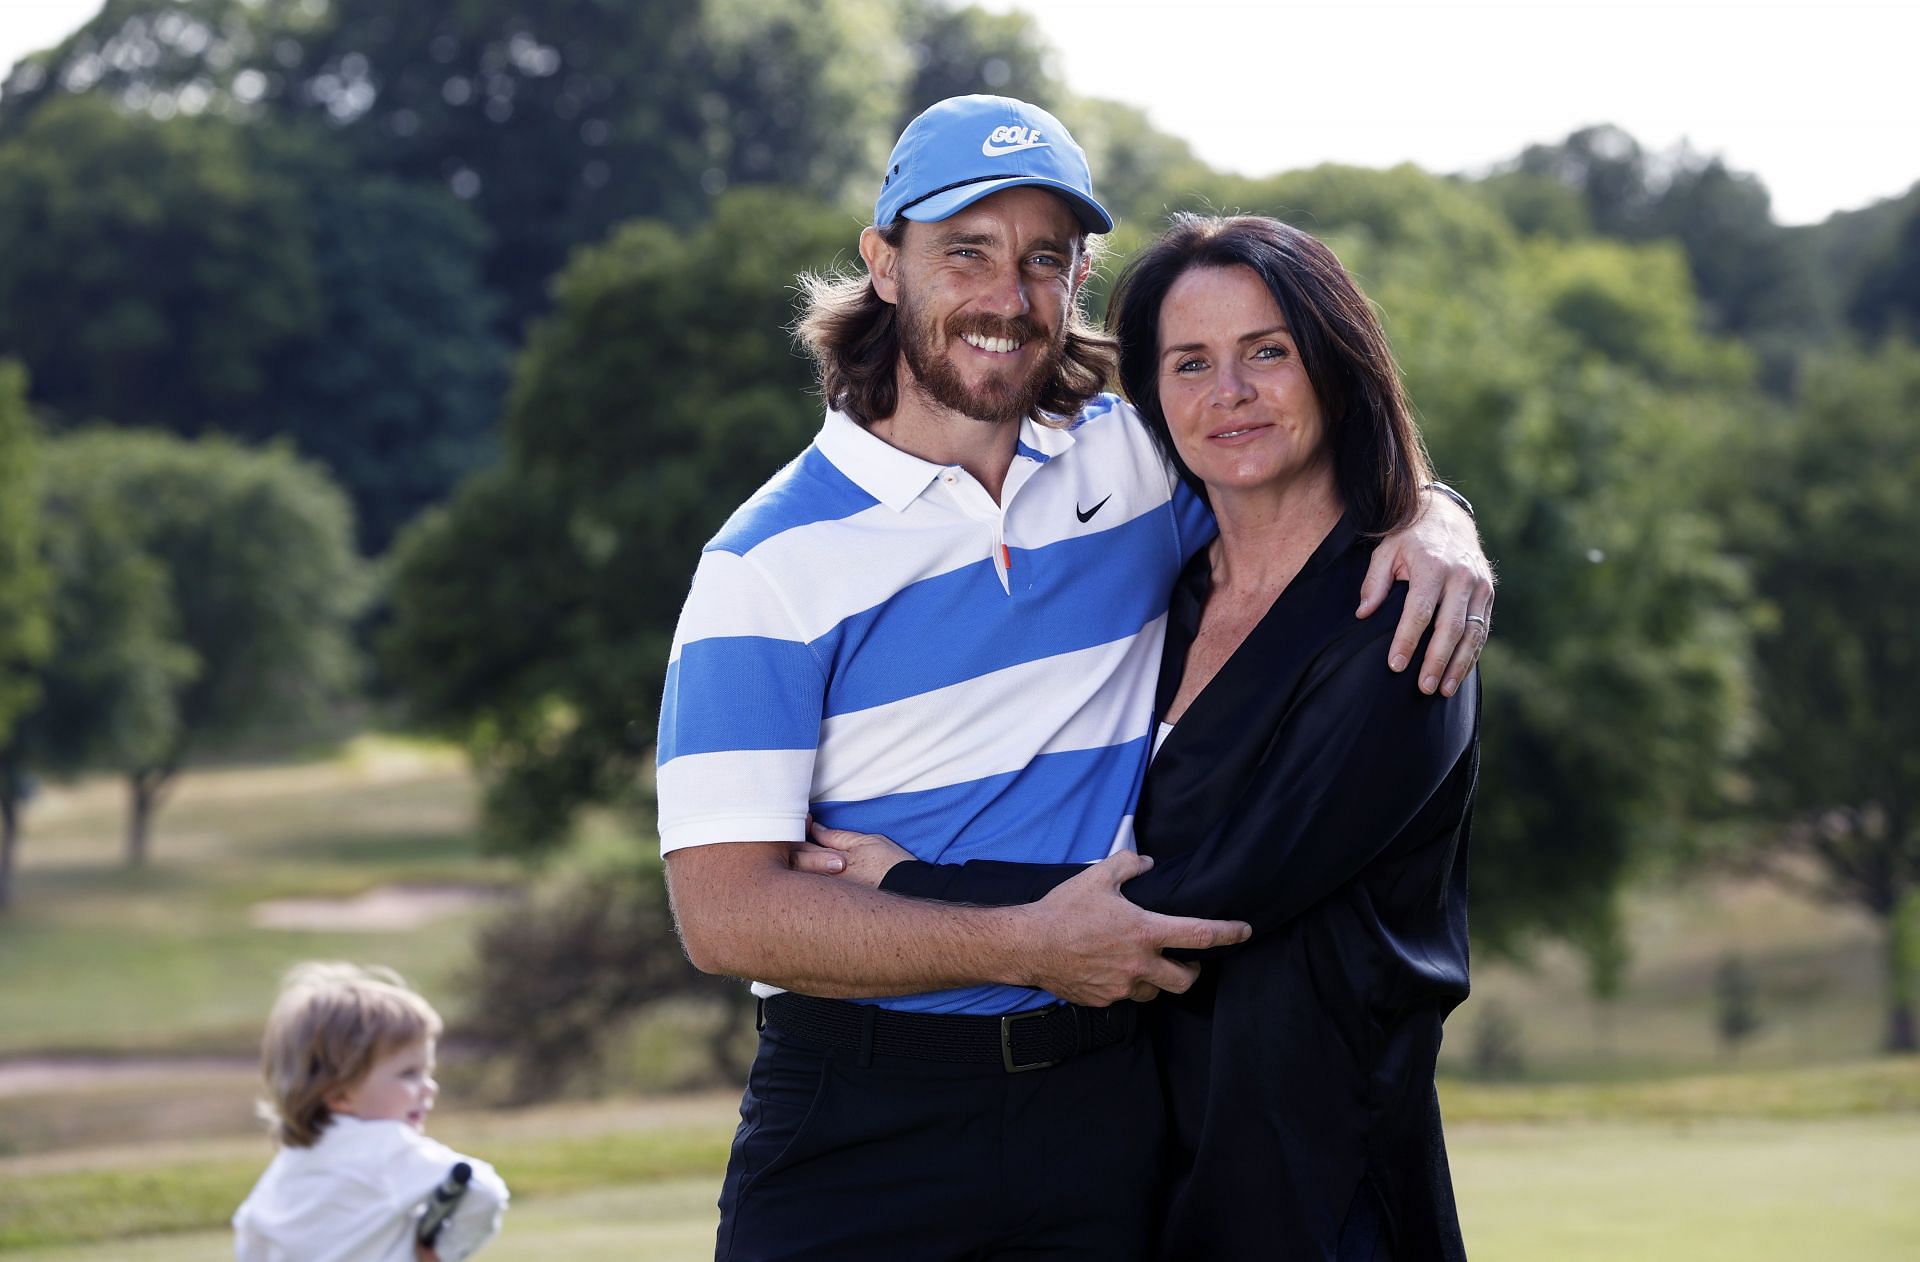 Professional Golfer Tommy Fleetwood Practices As Lockdown Restrictions Are Relaxed